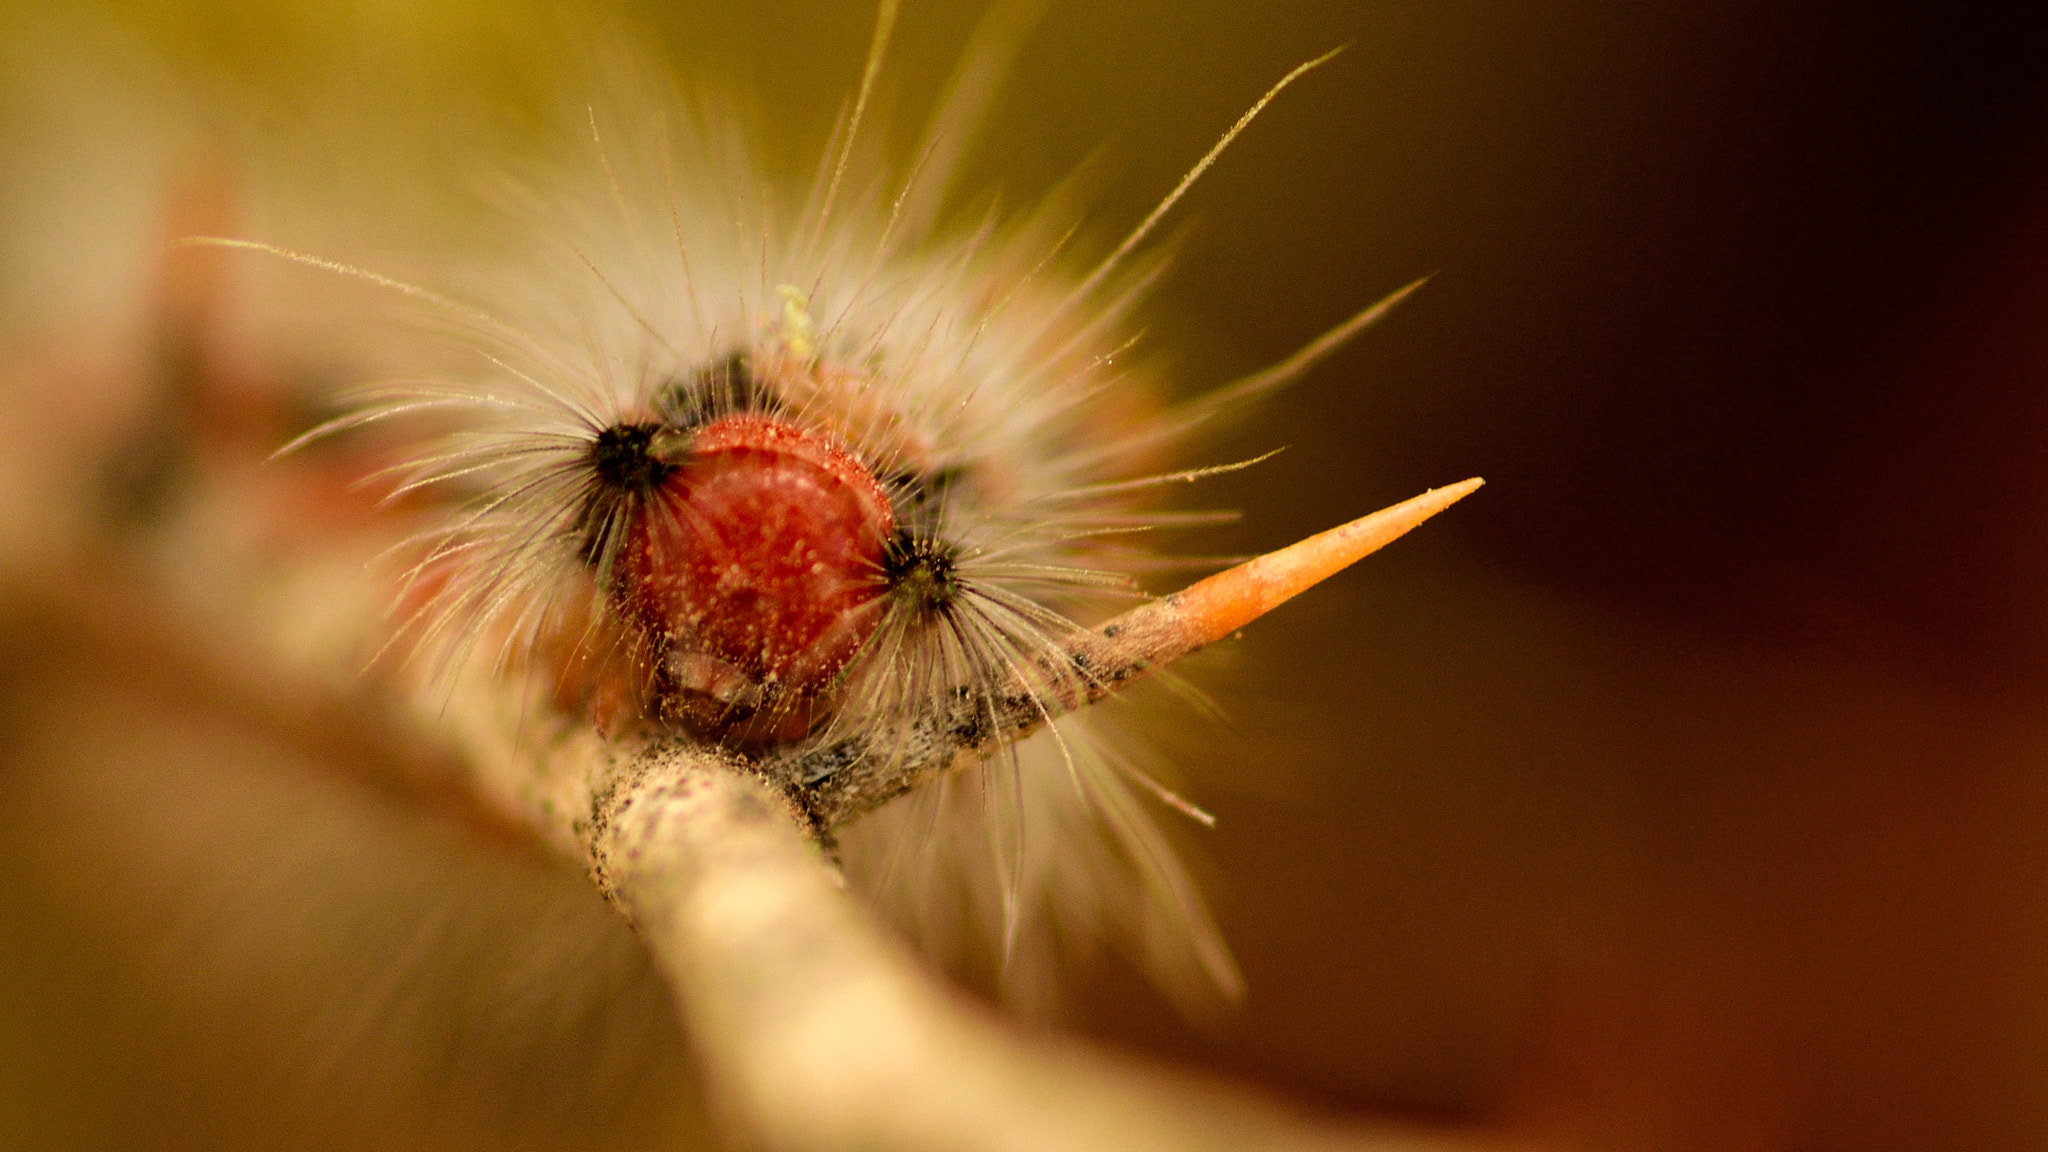 Nikon D5100 sample photo. Who's deadly thorn or me? photography